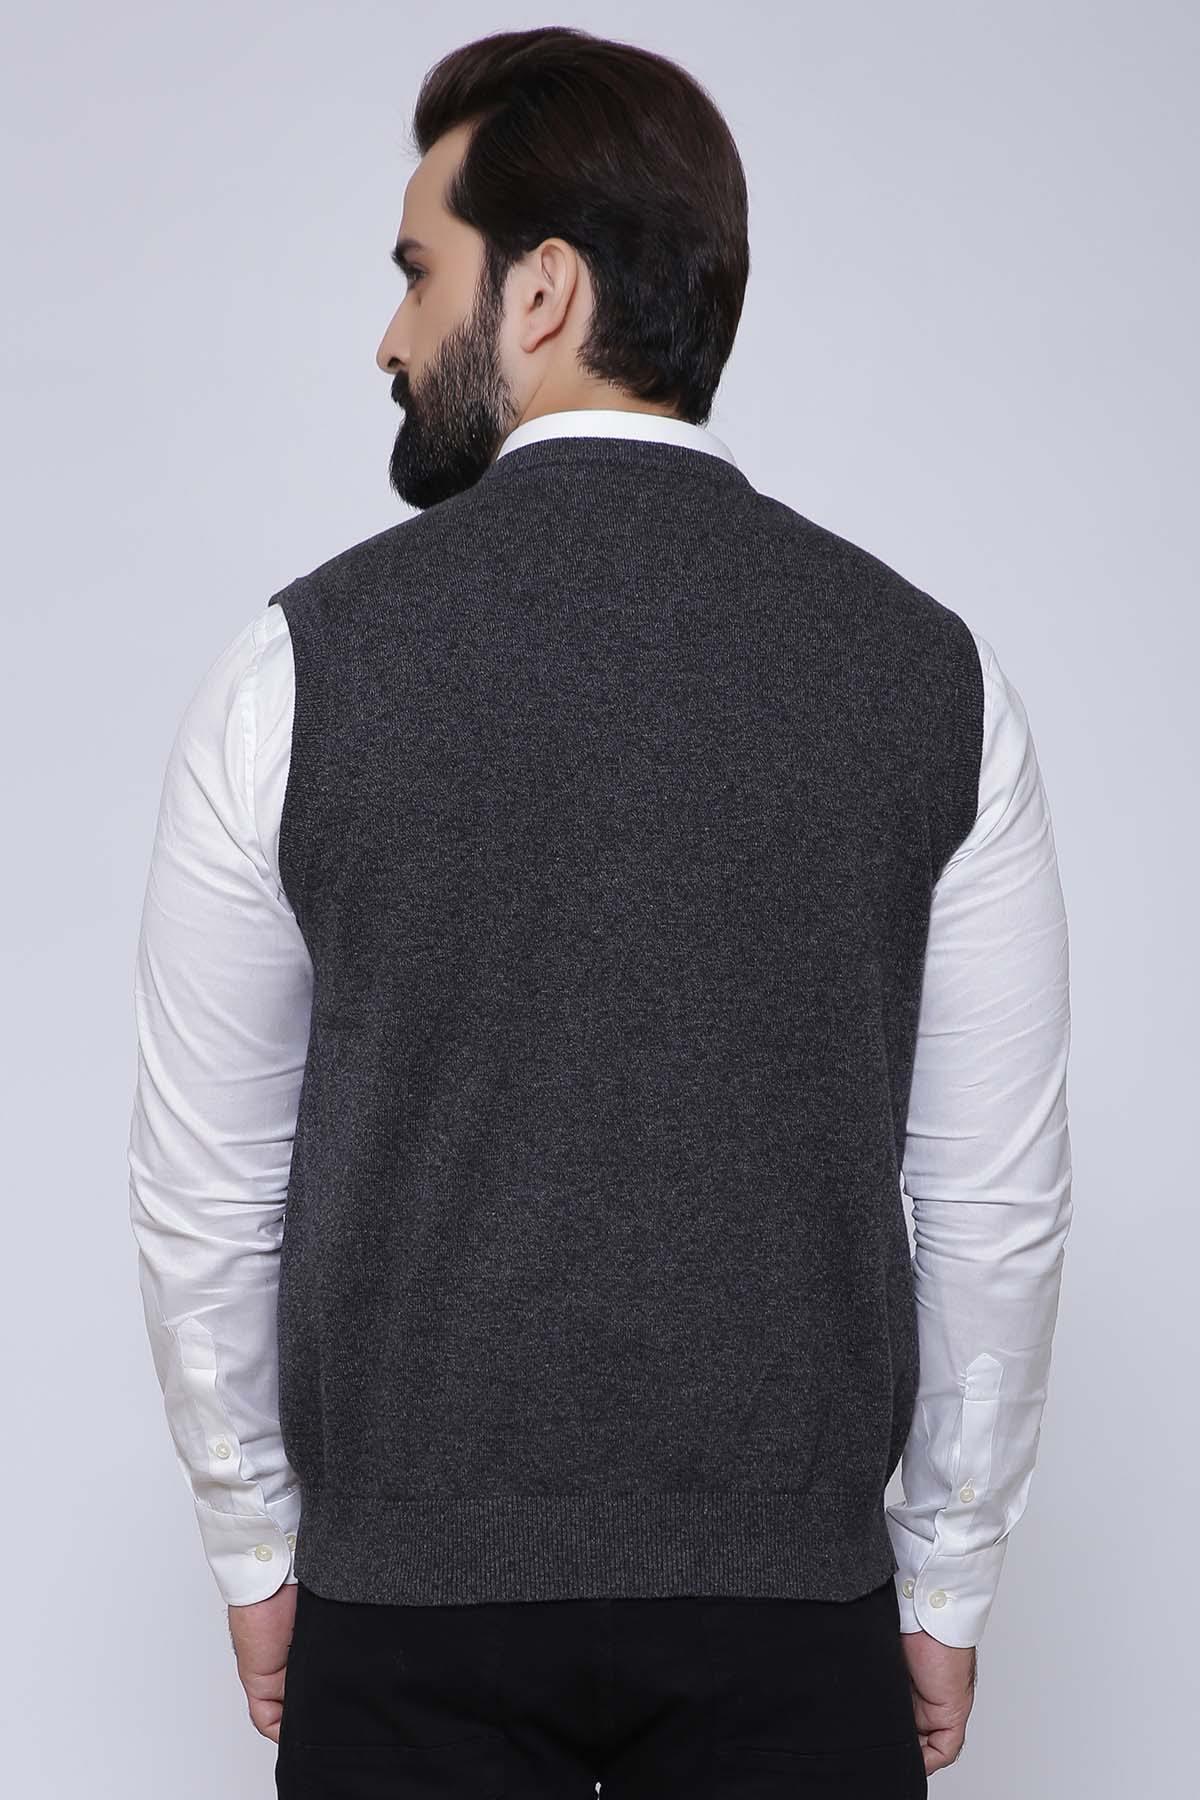 SWEATER CARDIGAN SLEEVE LESS DARK GREY at Charcoal Clothing